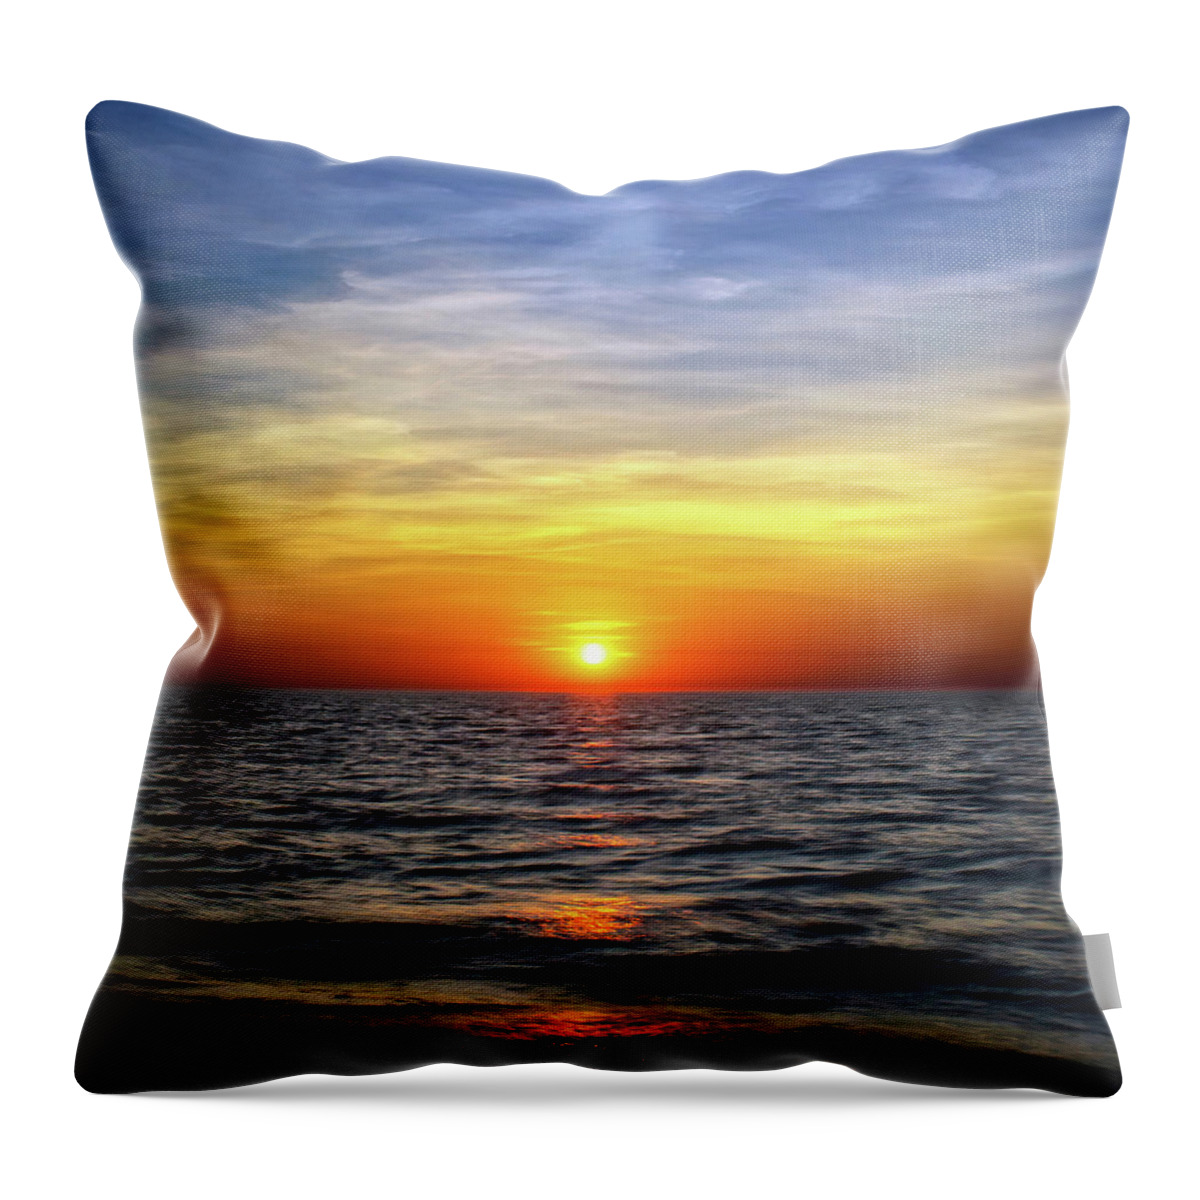 Lake Michigan Throw Pillow featuring the photograph Skipping Across The Waves by Kathi Mirto